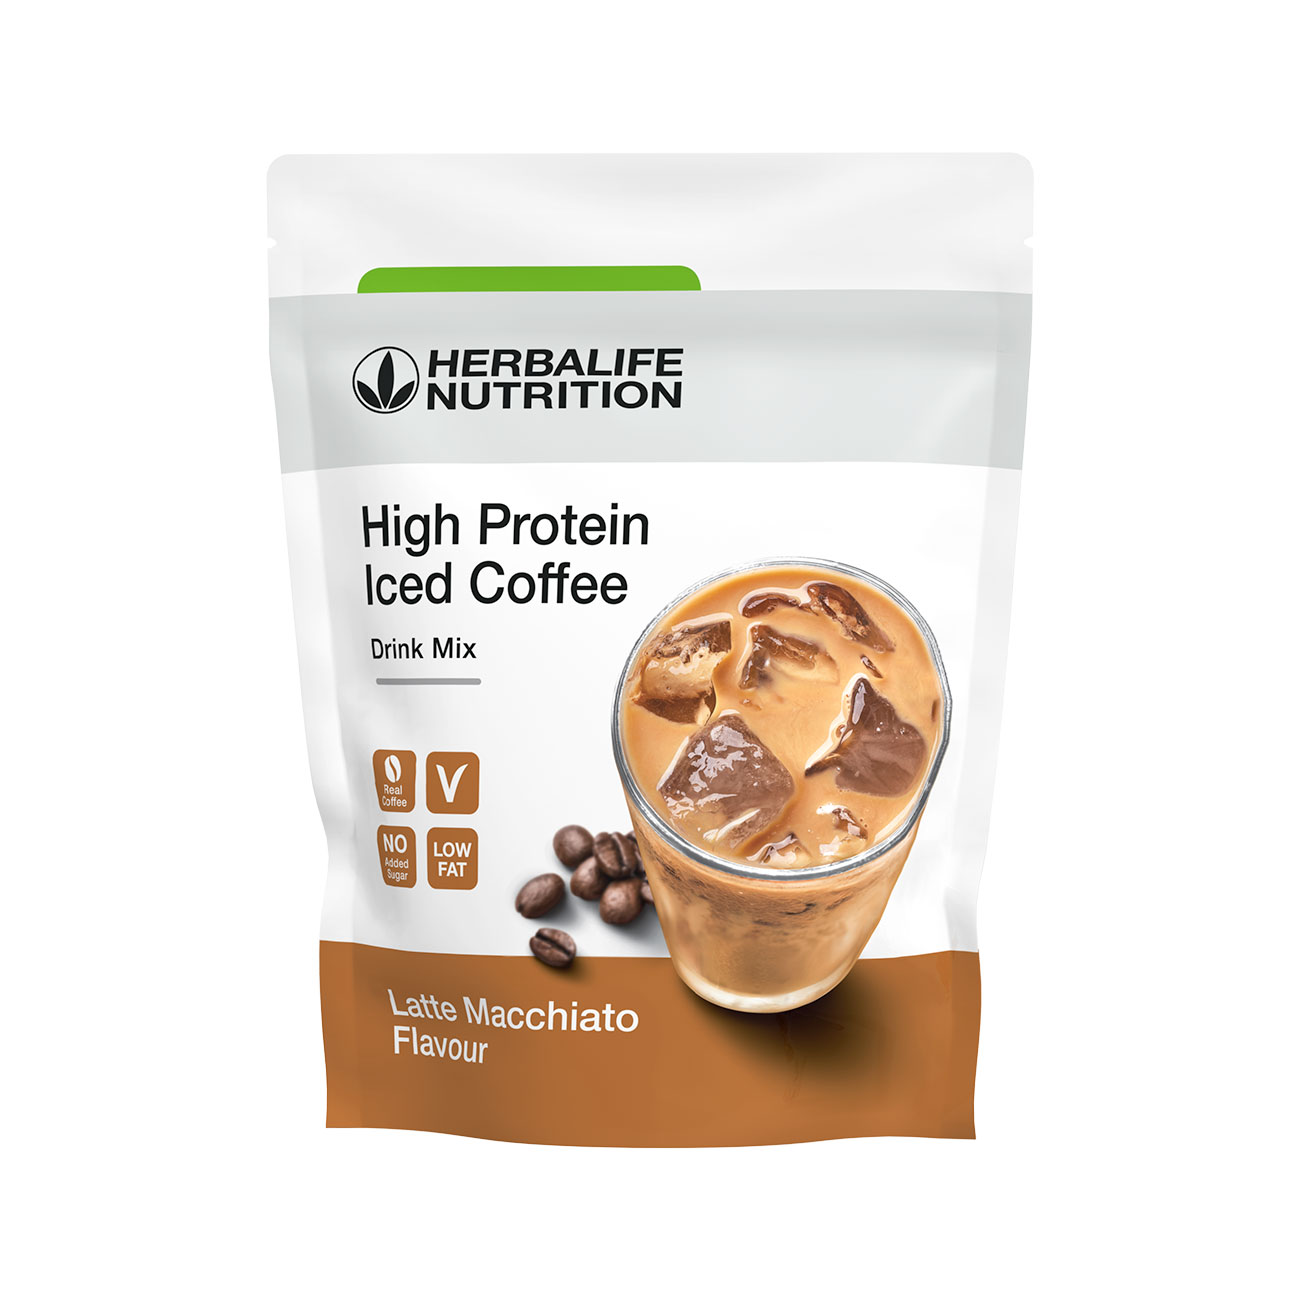 High Protein Iced Coffee Drink Mix High Protein Iced Coffee Γεύση Latte Macchiato product shot.